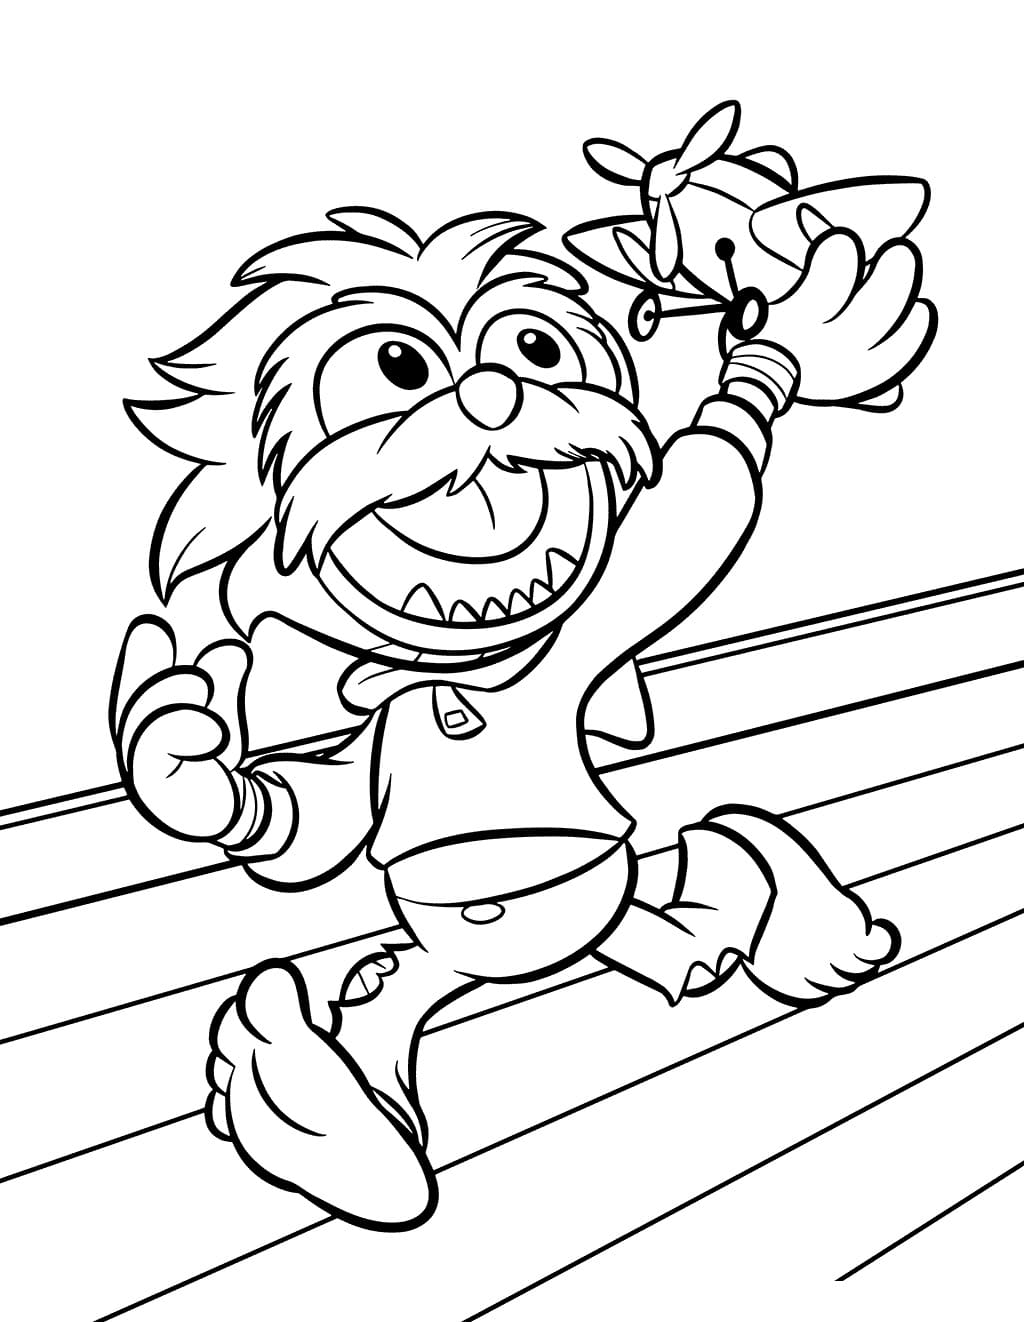 Baby Animal with Toy coloring page - Download, Print or Color Online ...